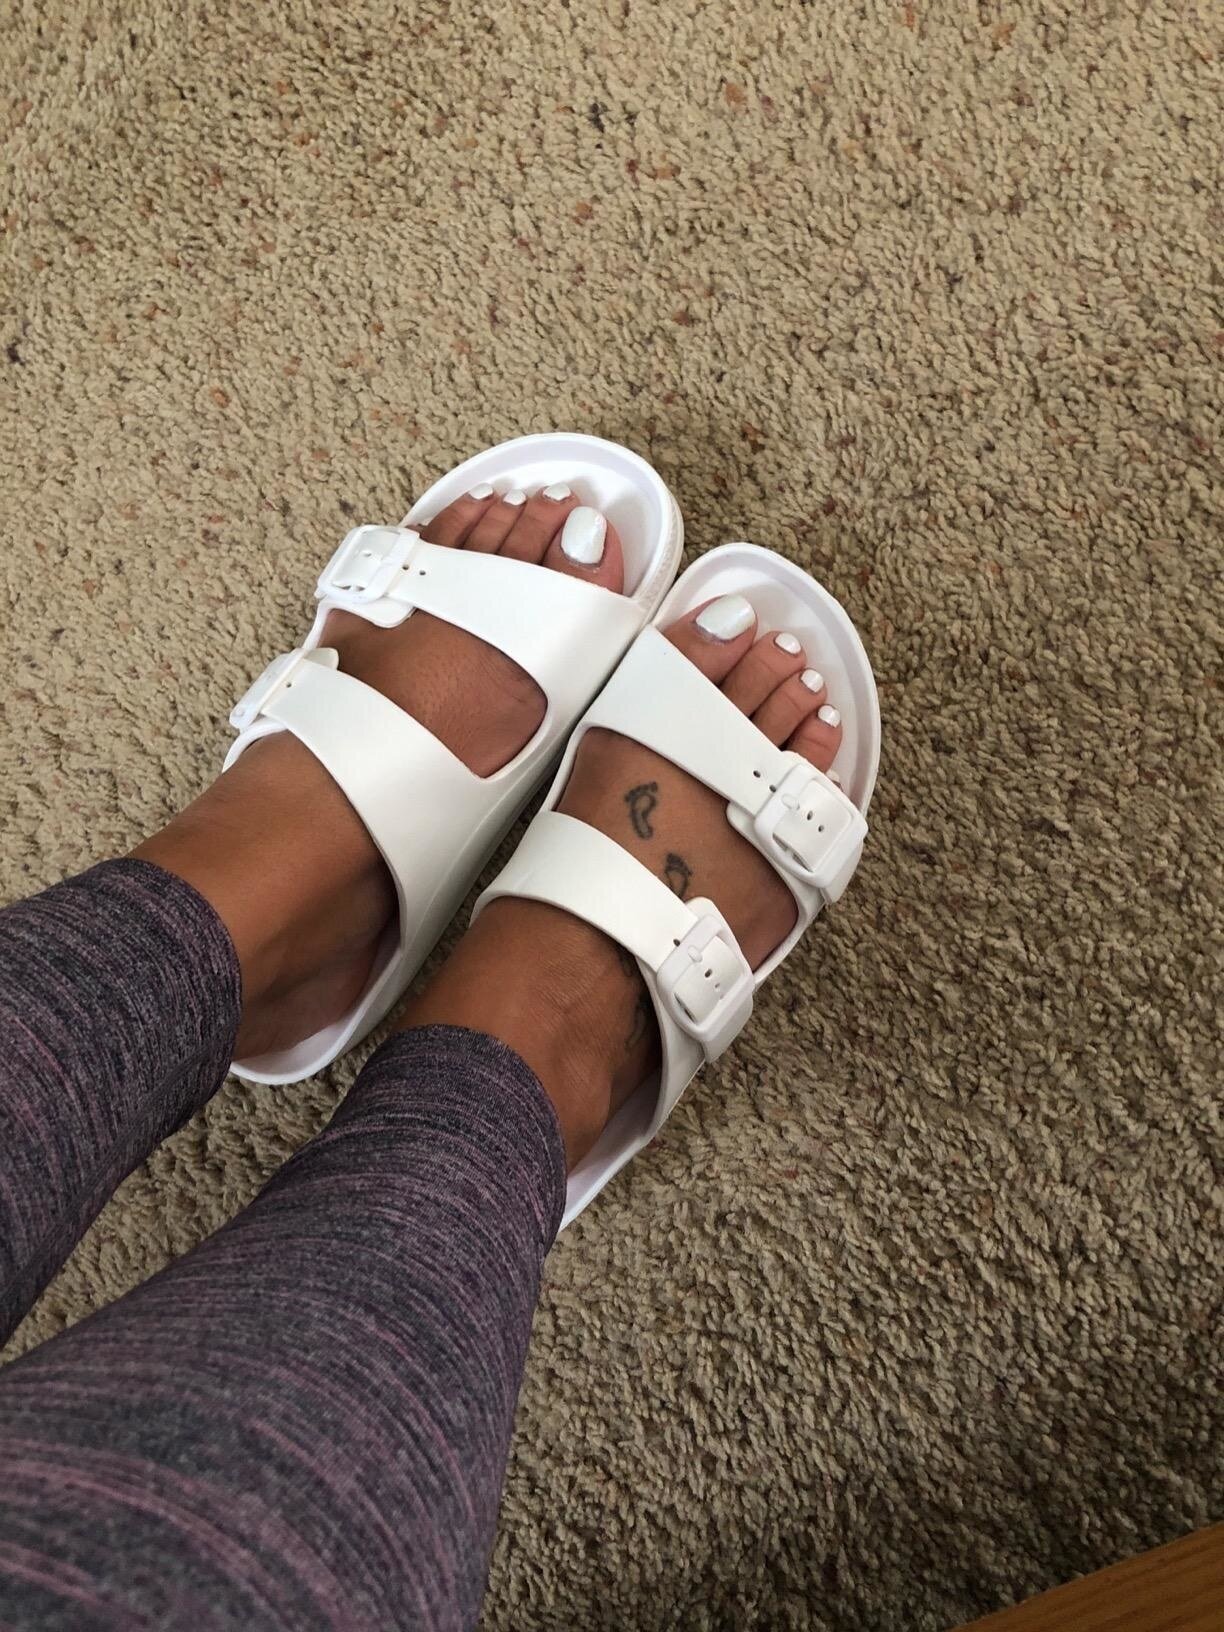 No joke: Comfy Birkenstock sandals are on sale for Amazon Prime Day — prices  are up to 33% off